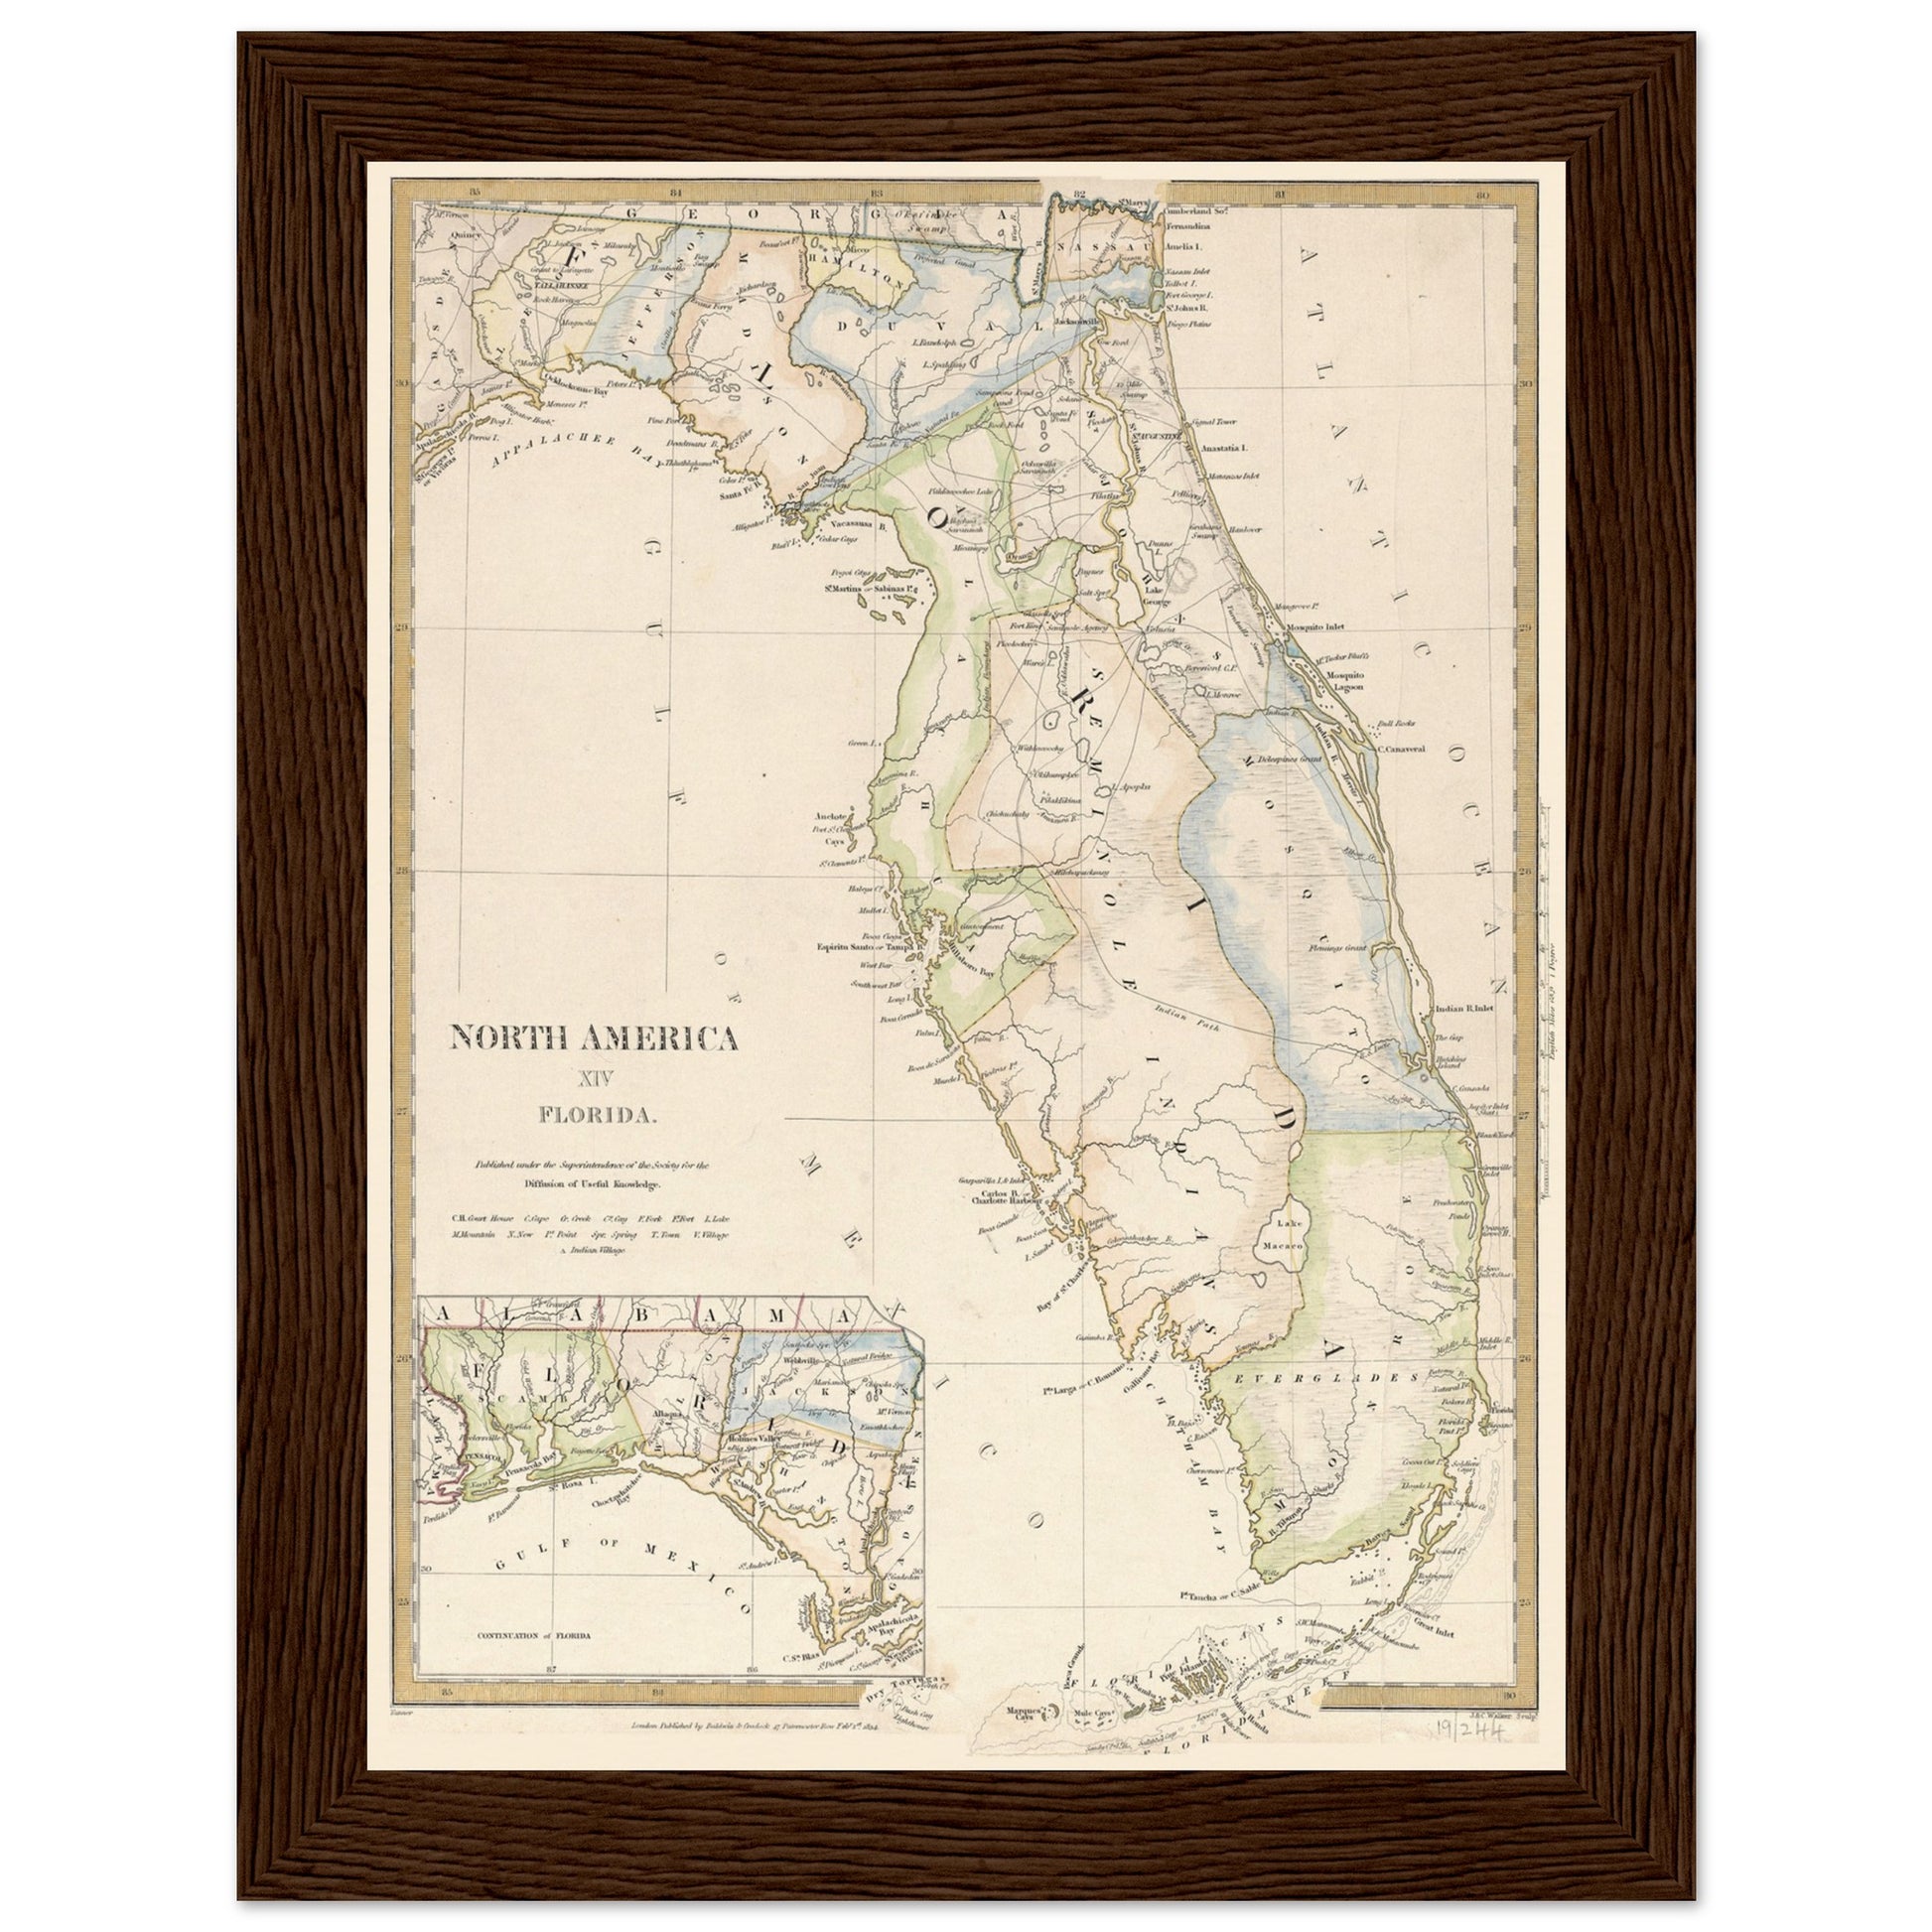 Henry Tanner map of Florida as a US territory in 1834.